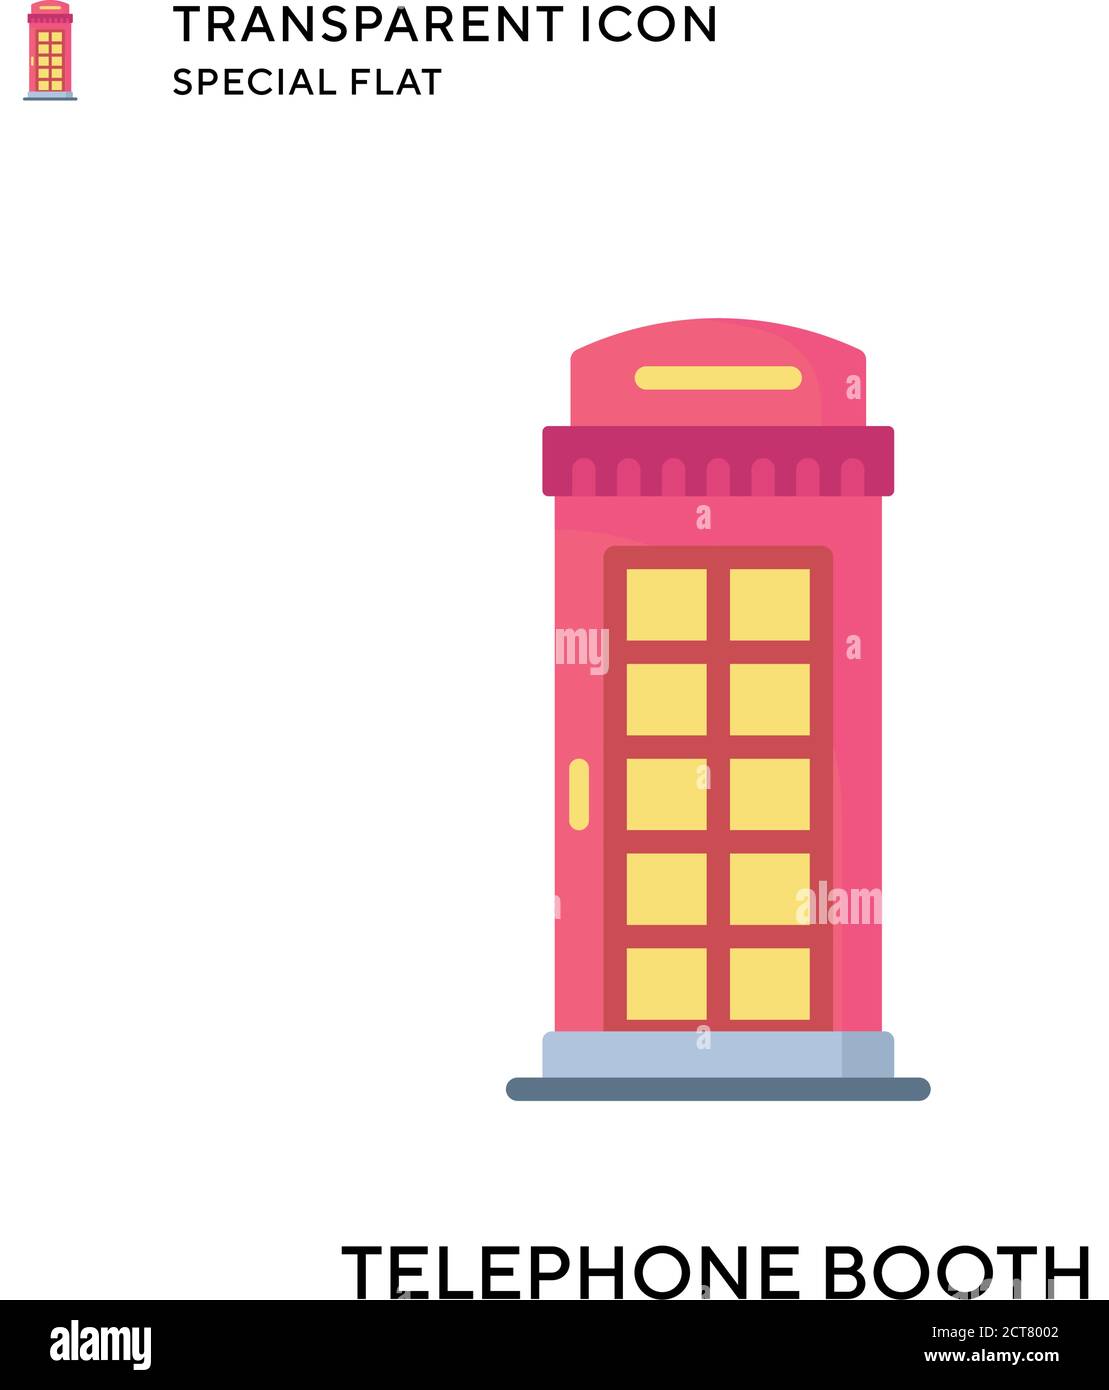 Telephone booth vector icon. Flat style illustration. EPS 10 vector. Stock Vector